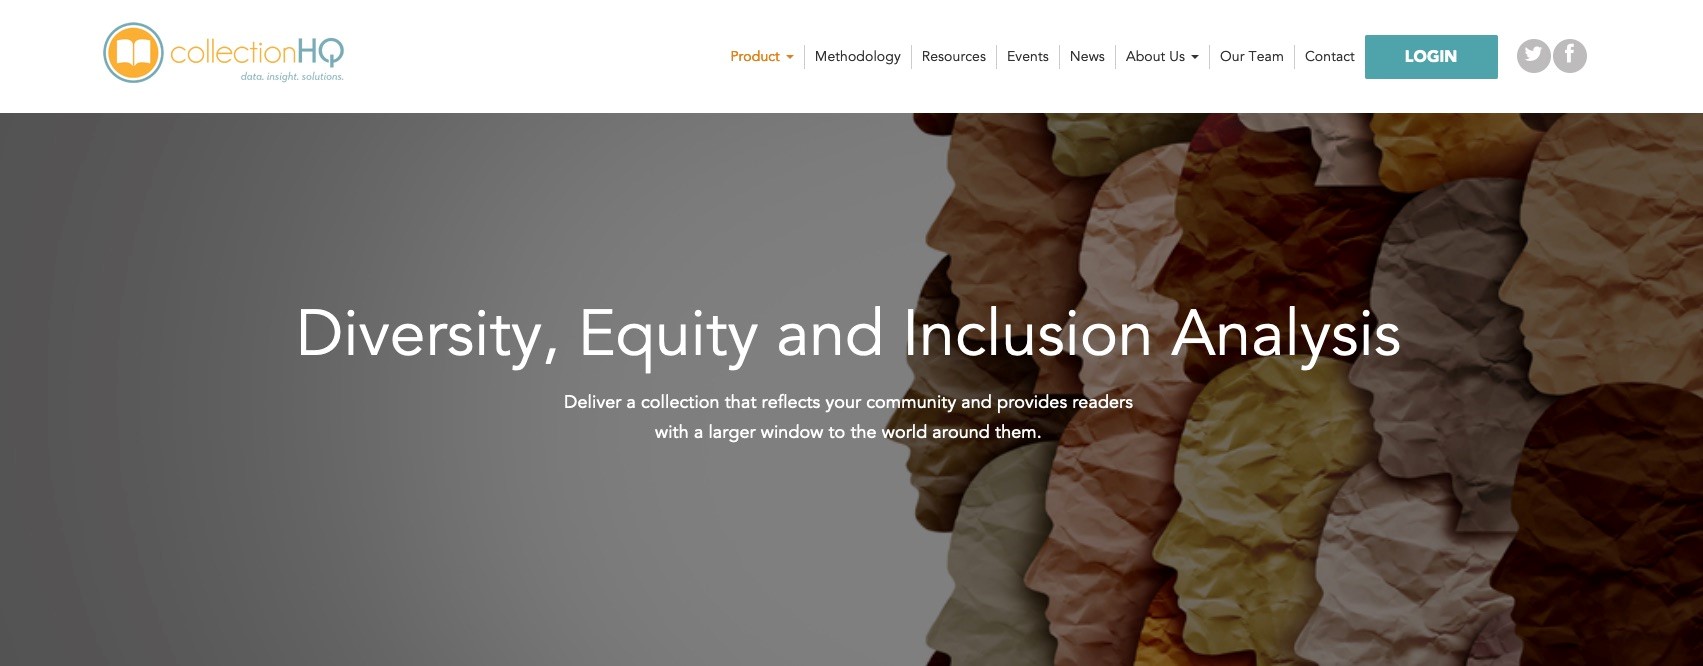 Diversity, Equity, and Inclusion Analysis Powered by CollectionHQ | Reference eReview